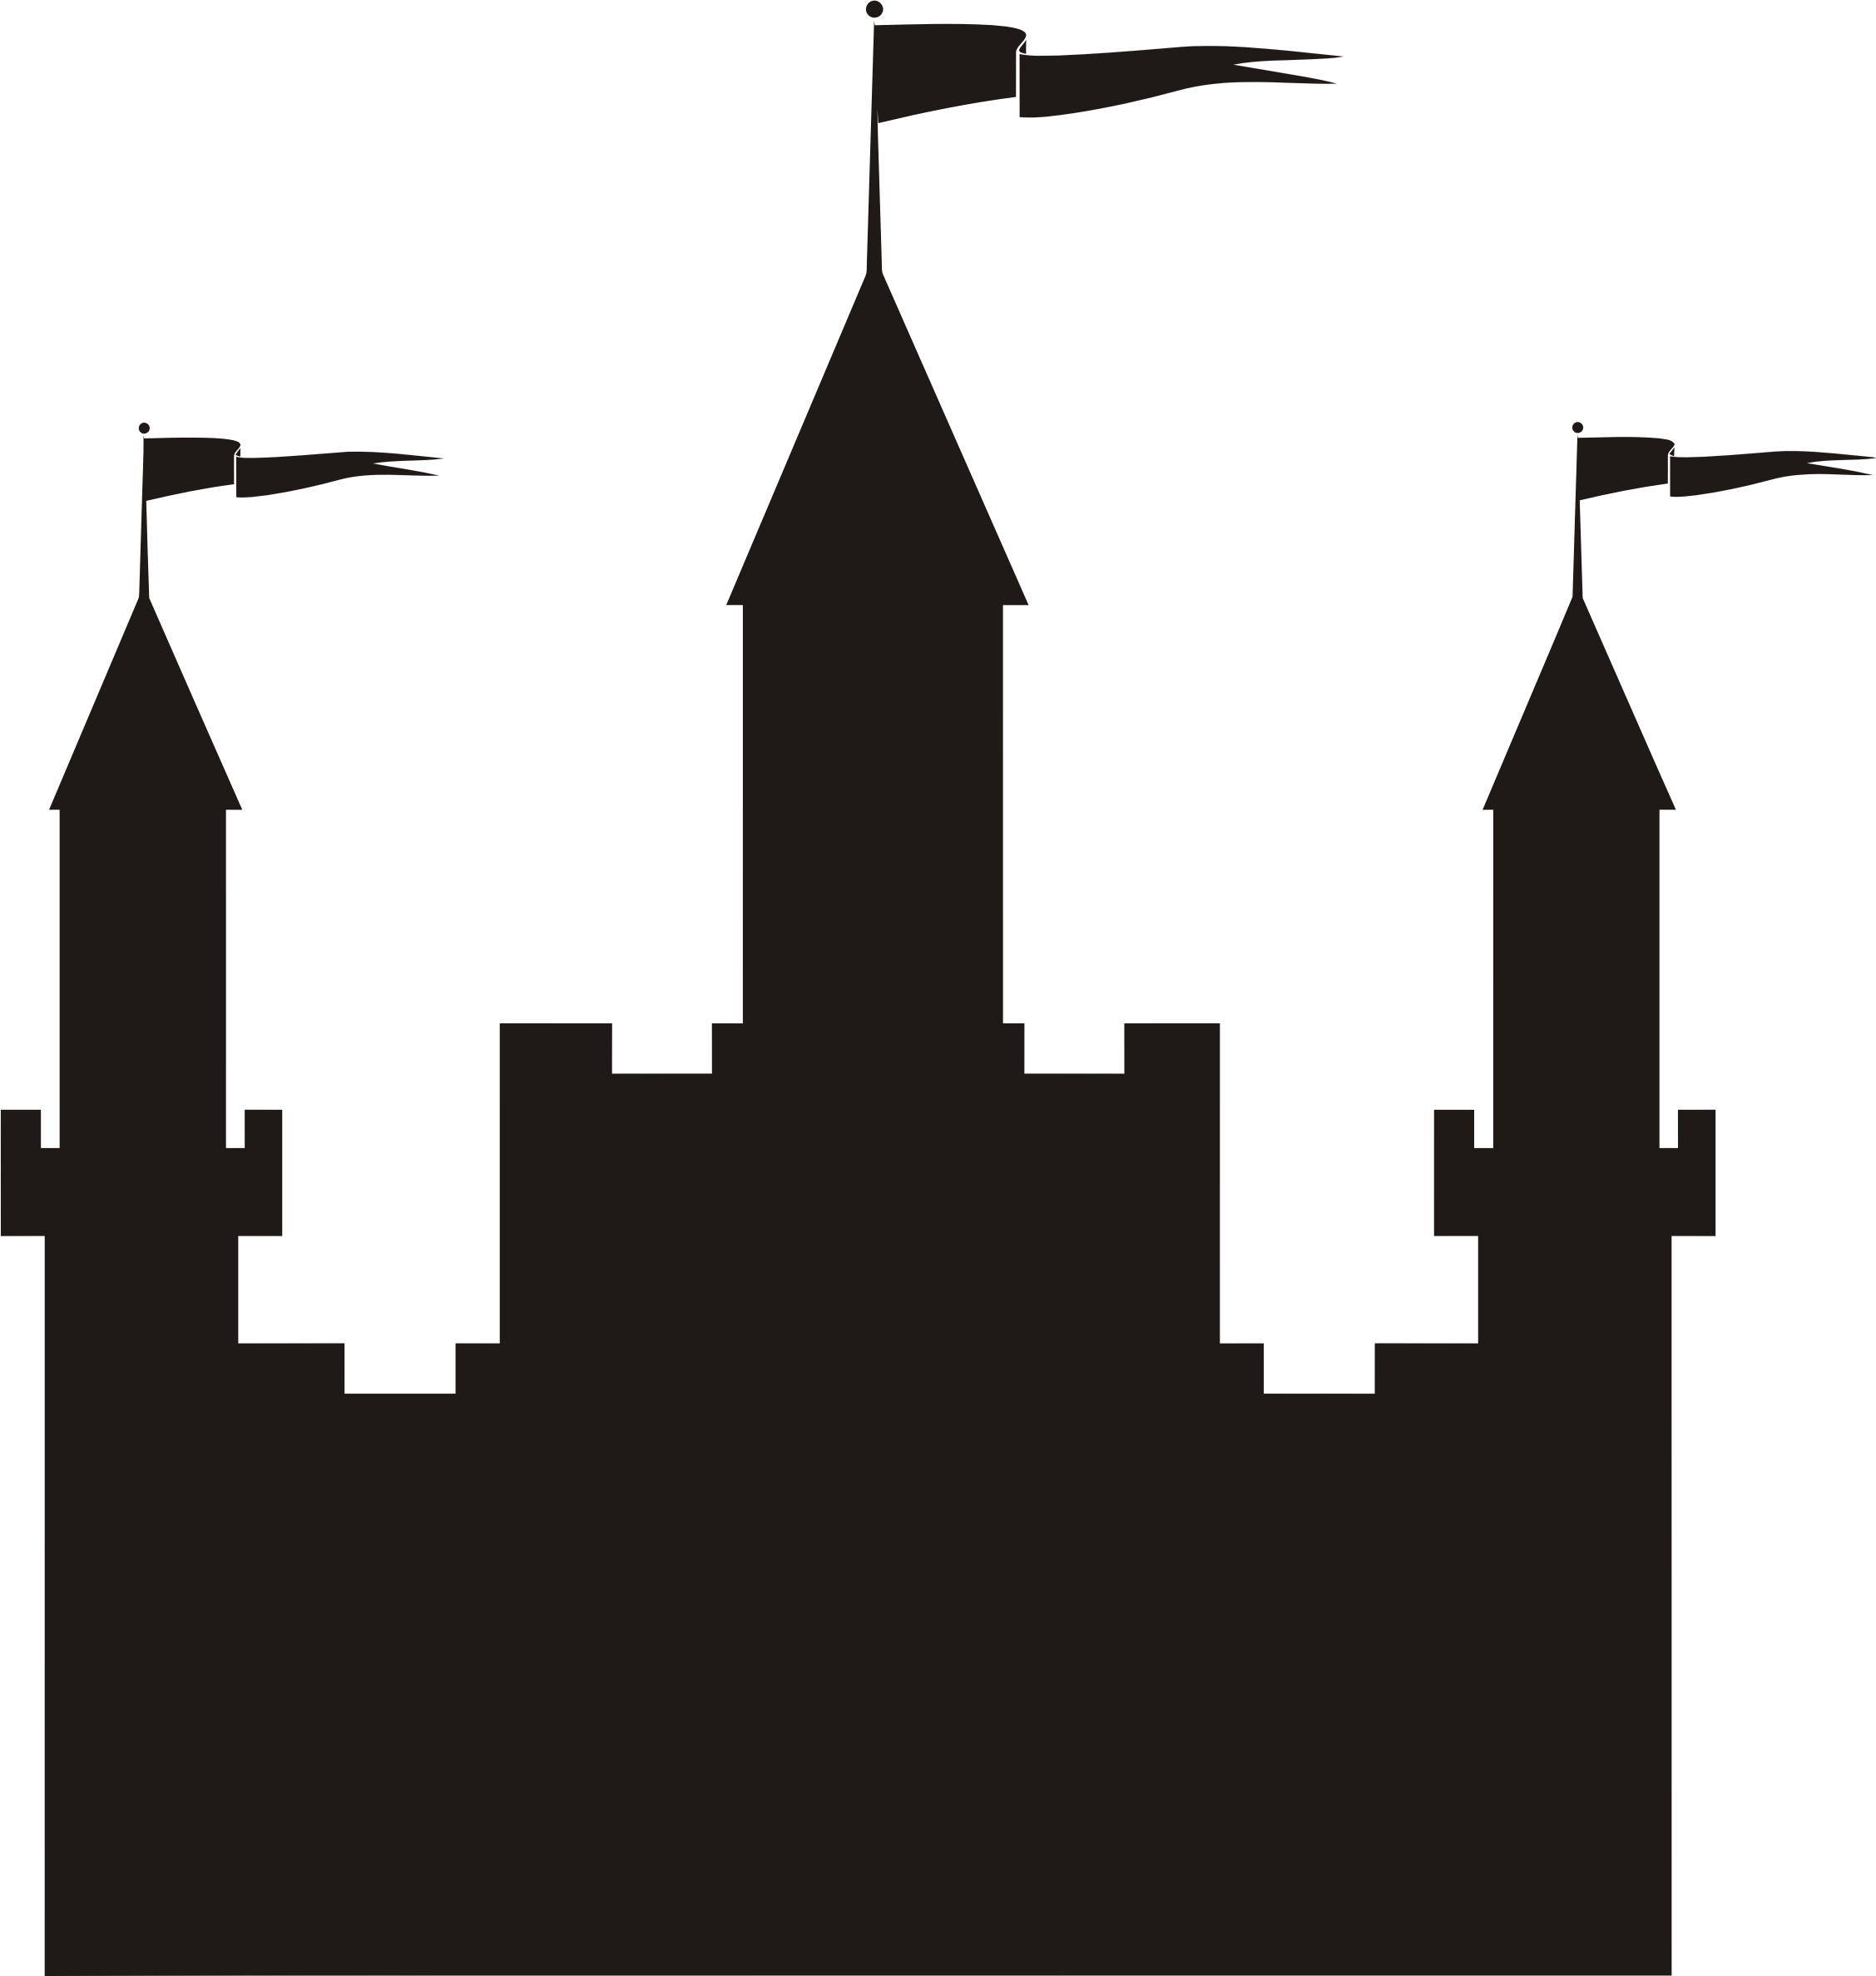 Spooky clipart gothic castle. Silhouette at getdrawings com